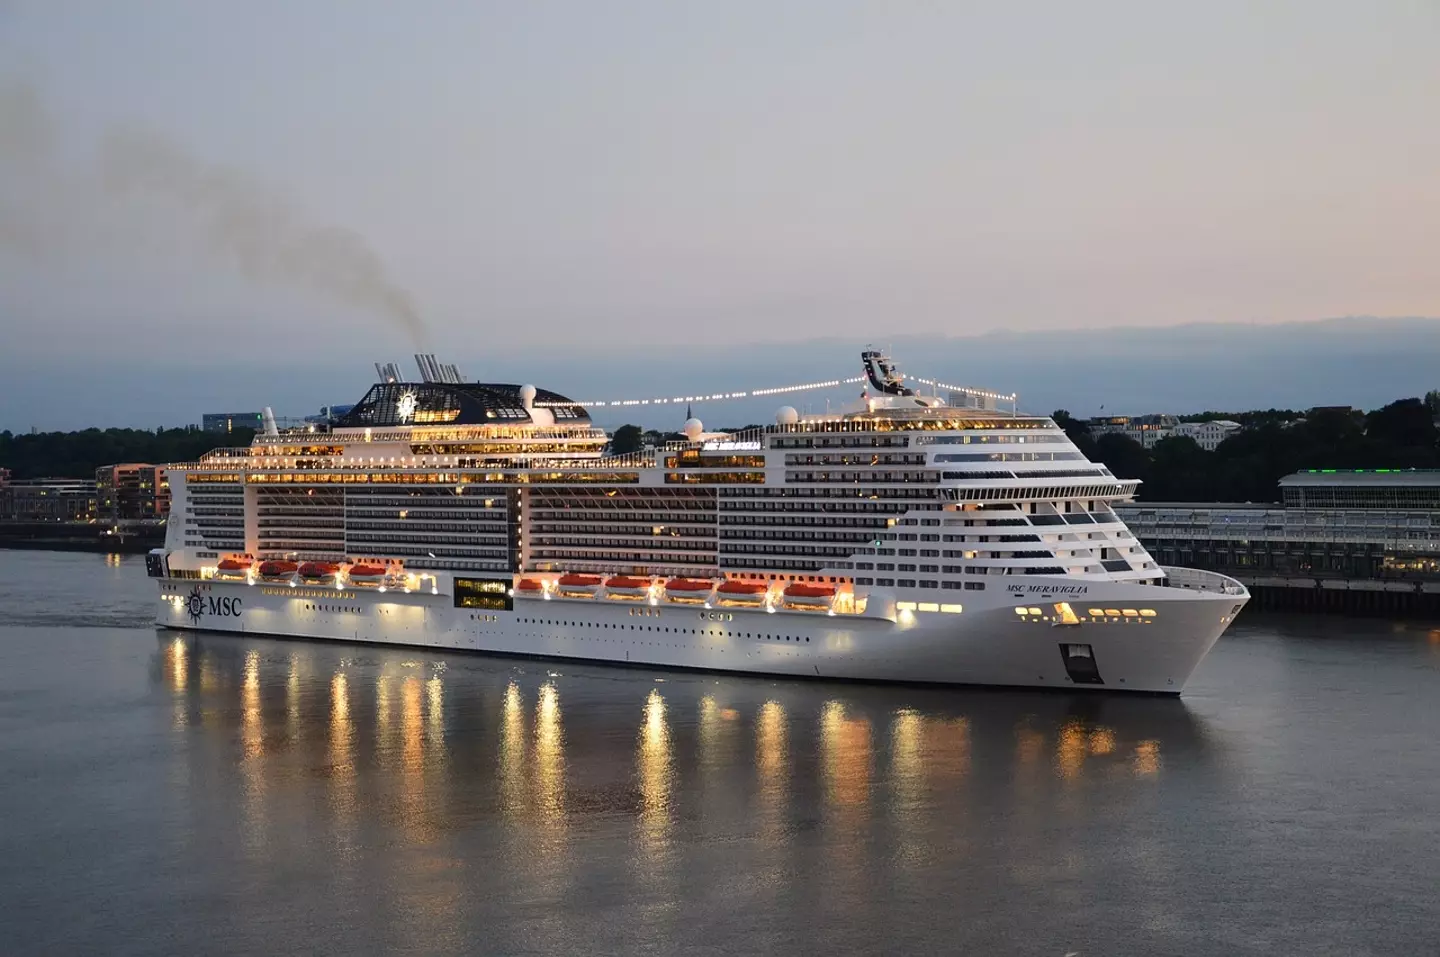 Have you ever been tempted by a cruise?